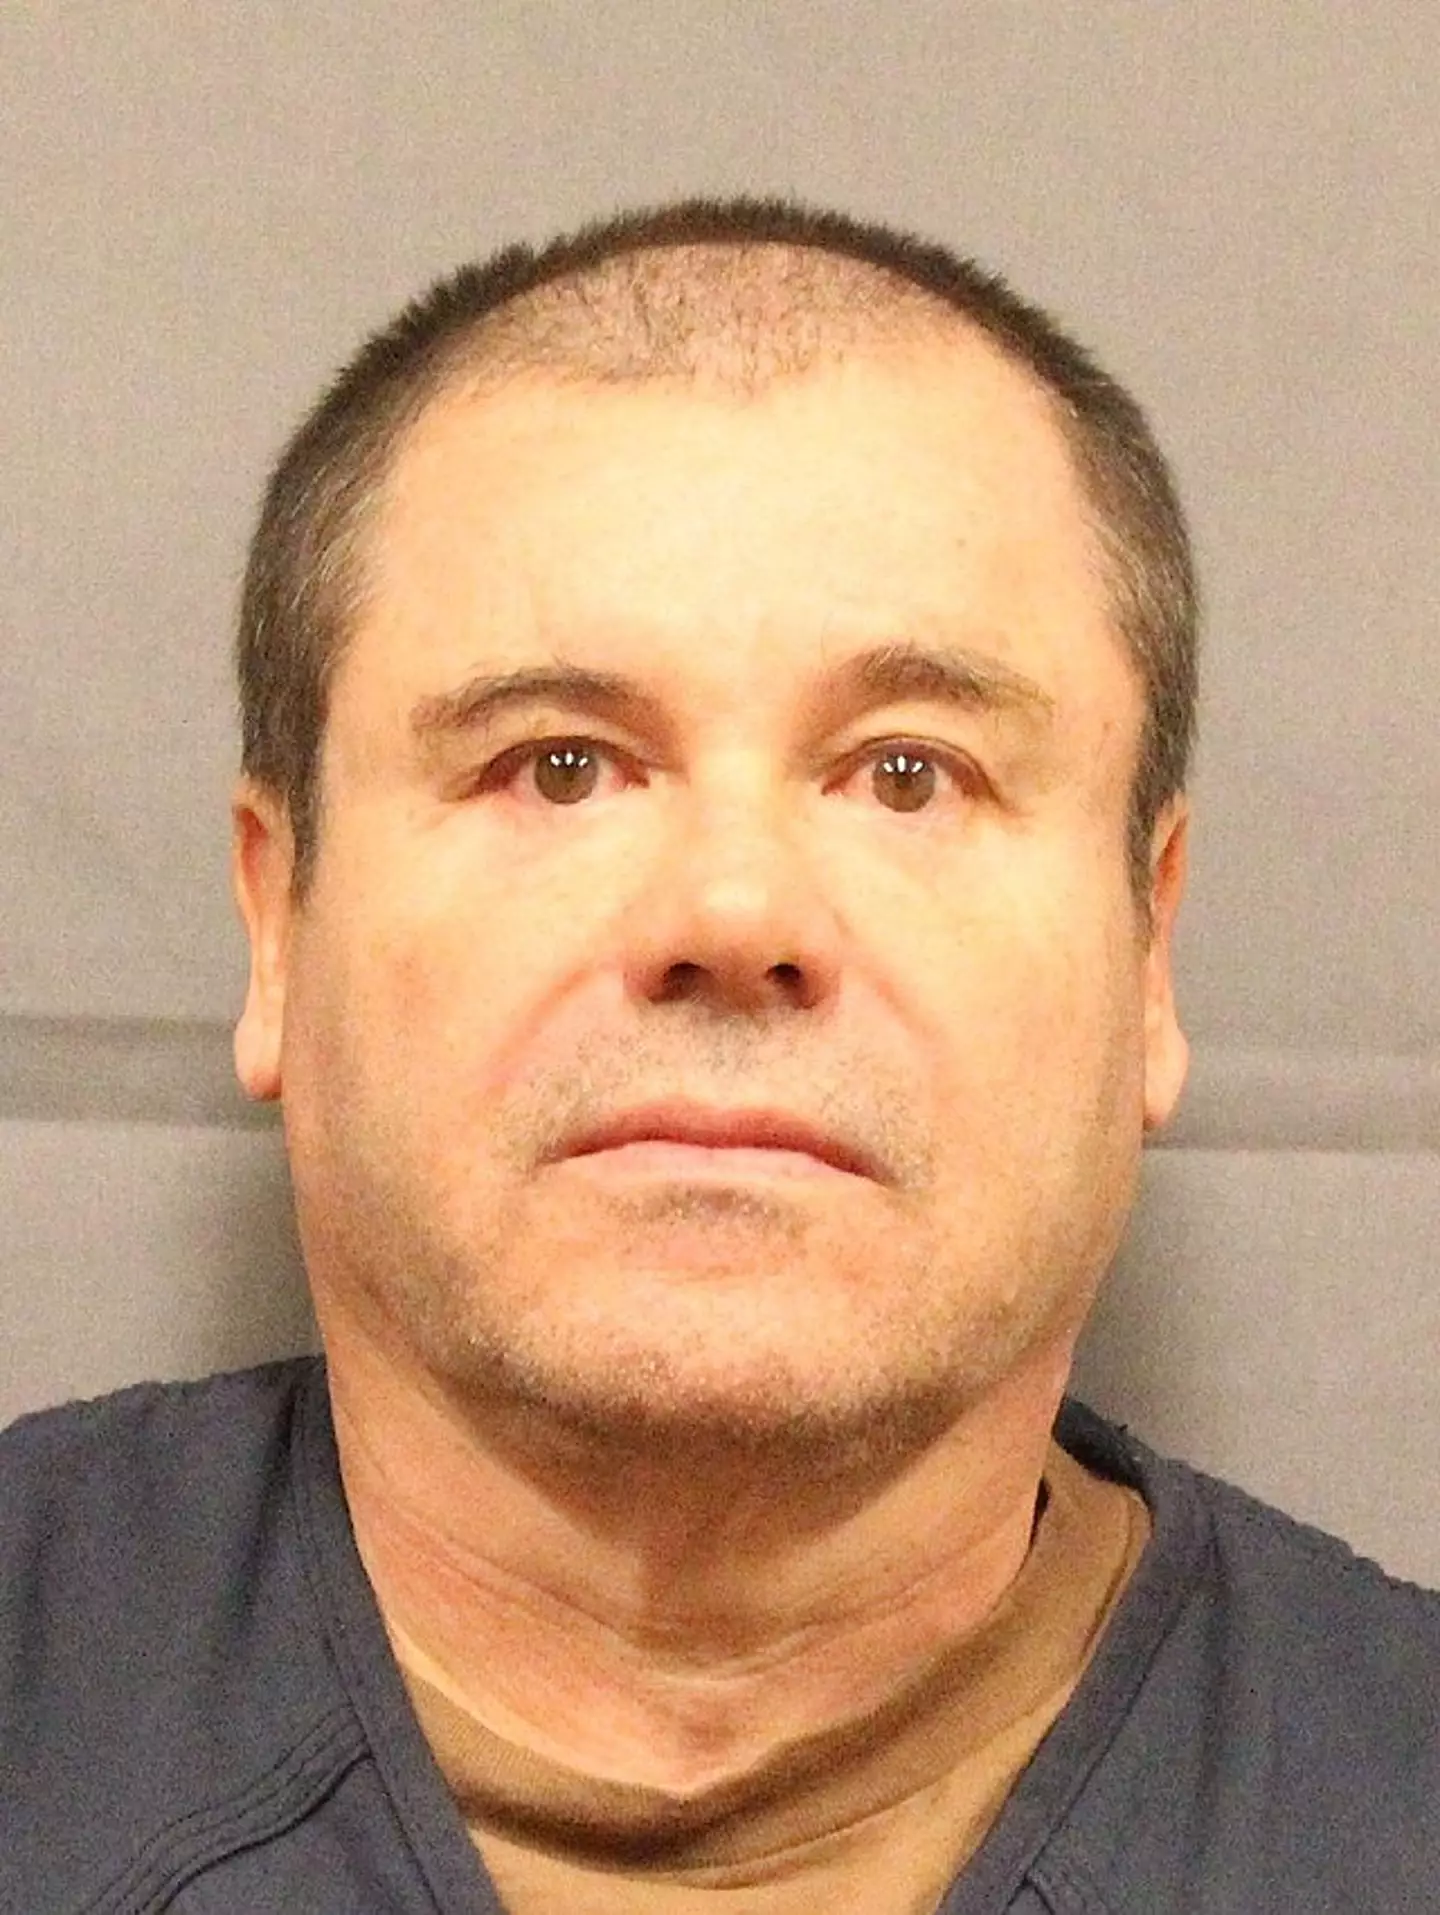 El Chapo is currently serving a life sentence in the US.